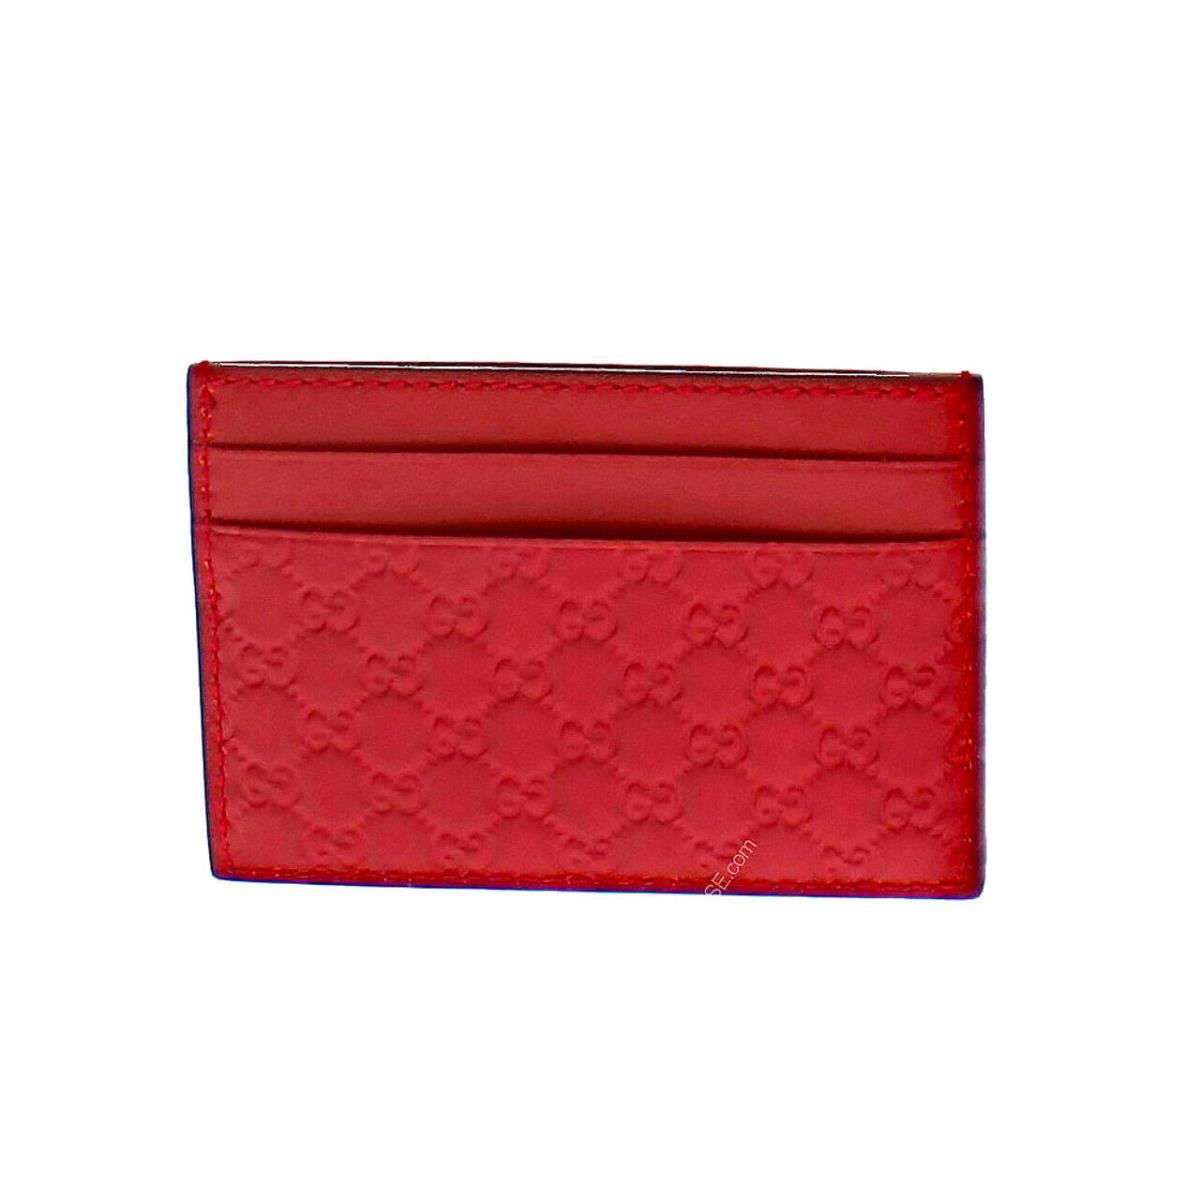 Gucci Microguccissima GG Red Card Holder 262837 BMJ1N 6420